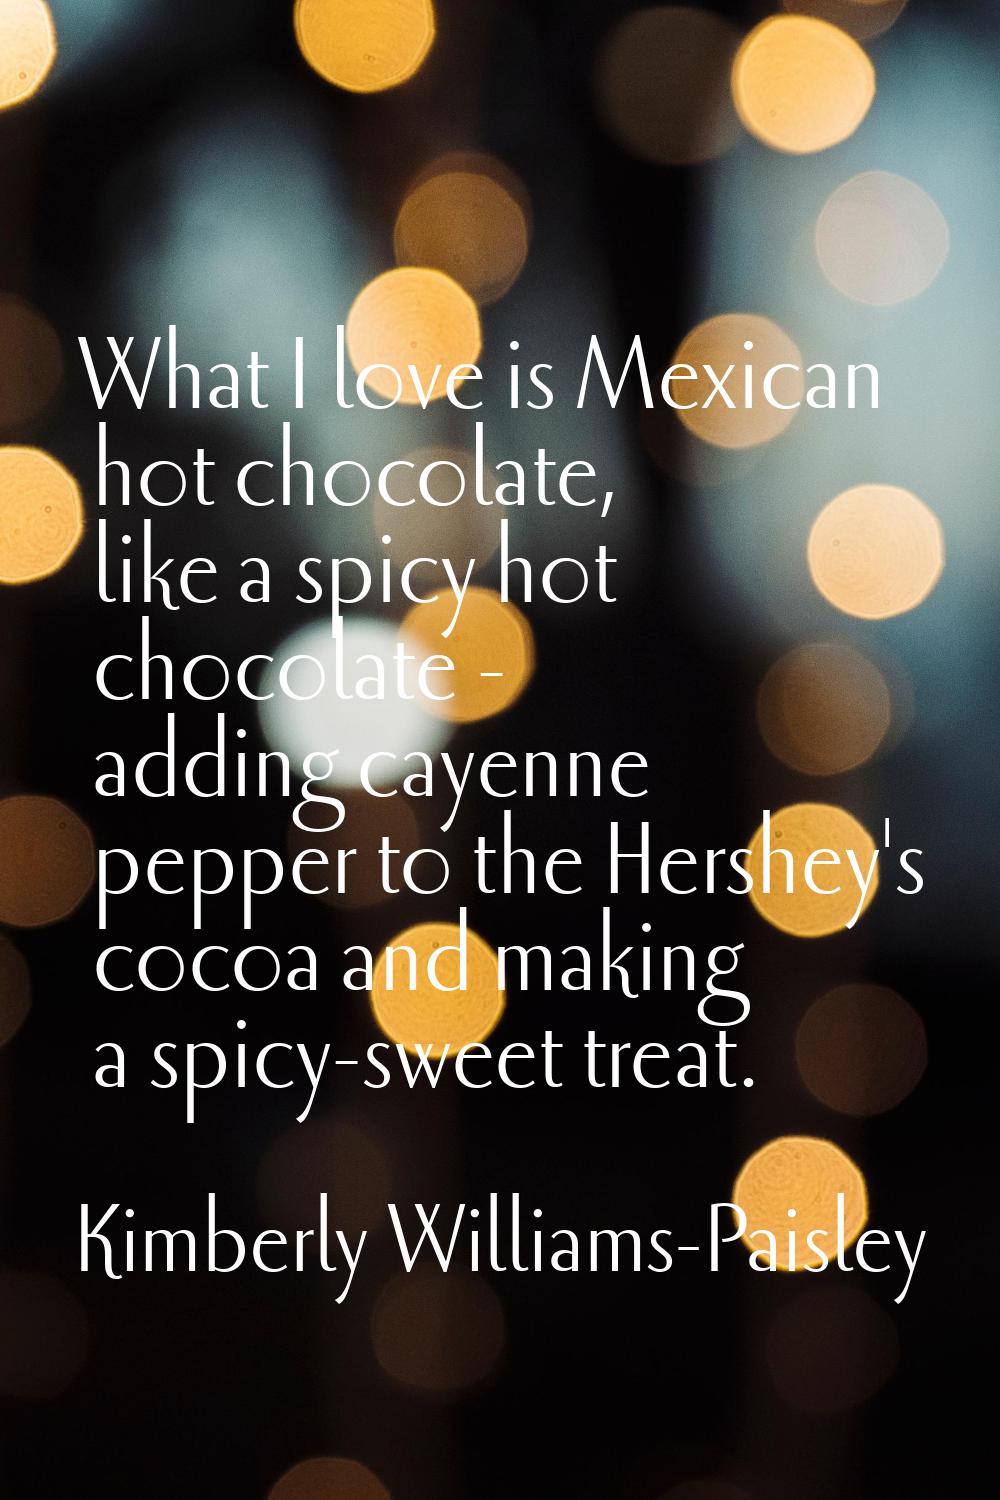 What I love is Mexican hot chocolate, like a spicy hot chocolate - adding cayenne pepper to the Her